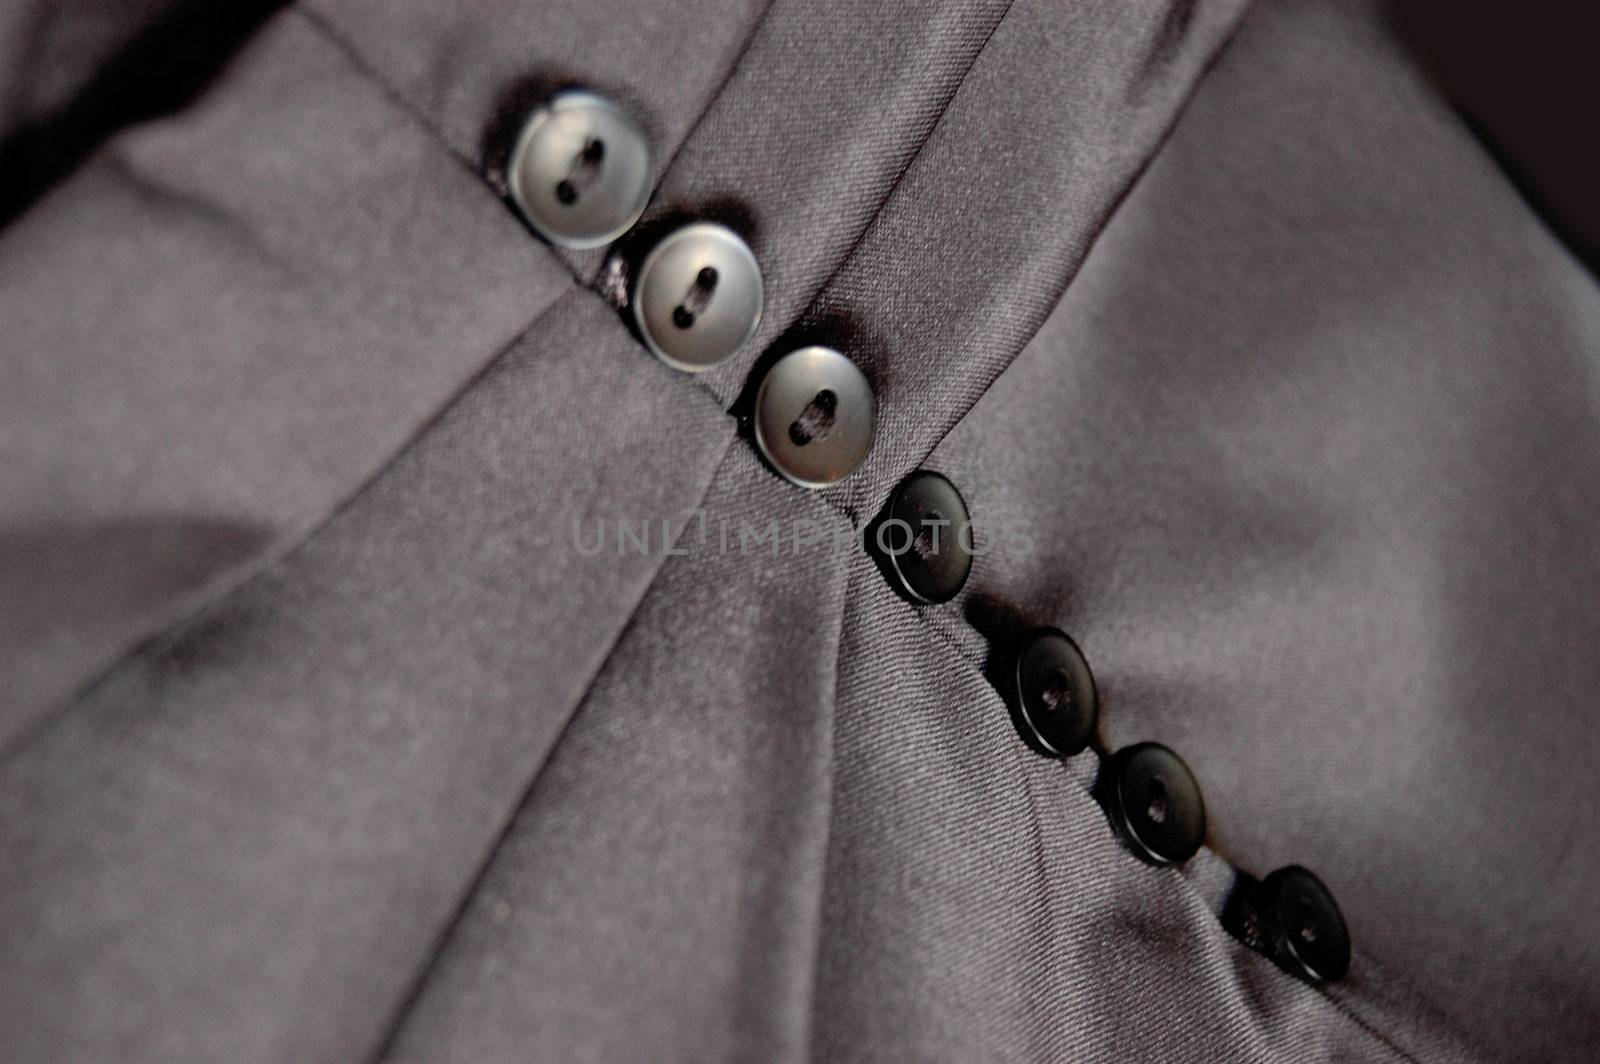 Part of silky skirt with buttons and folds